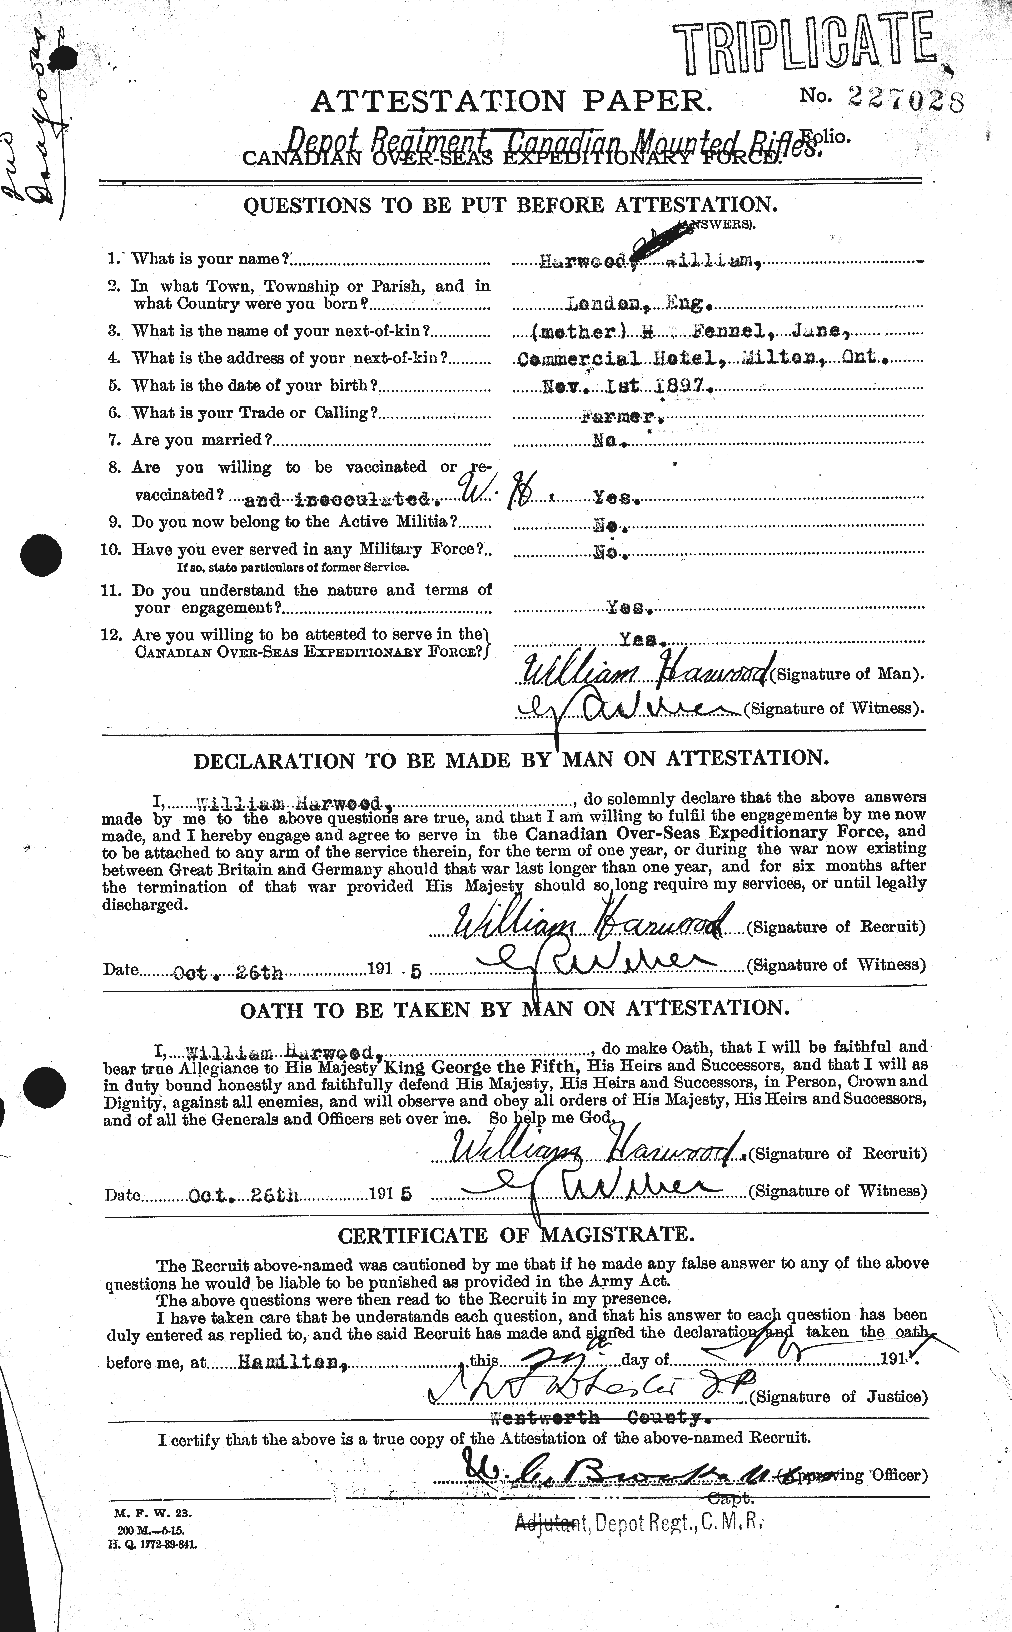 Personnel Records of the First World War - CEF 384749a